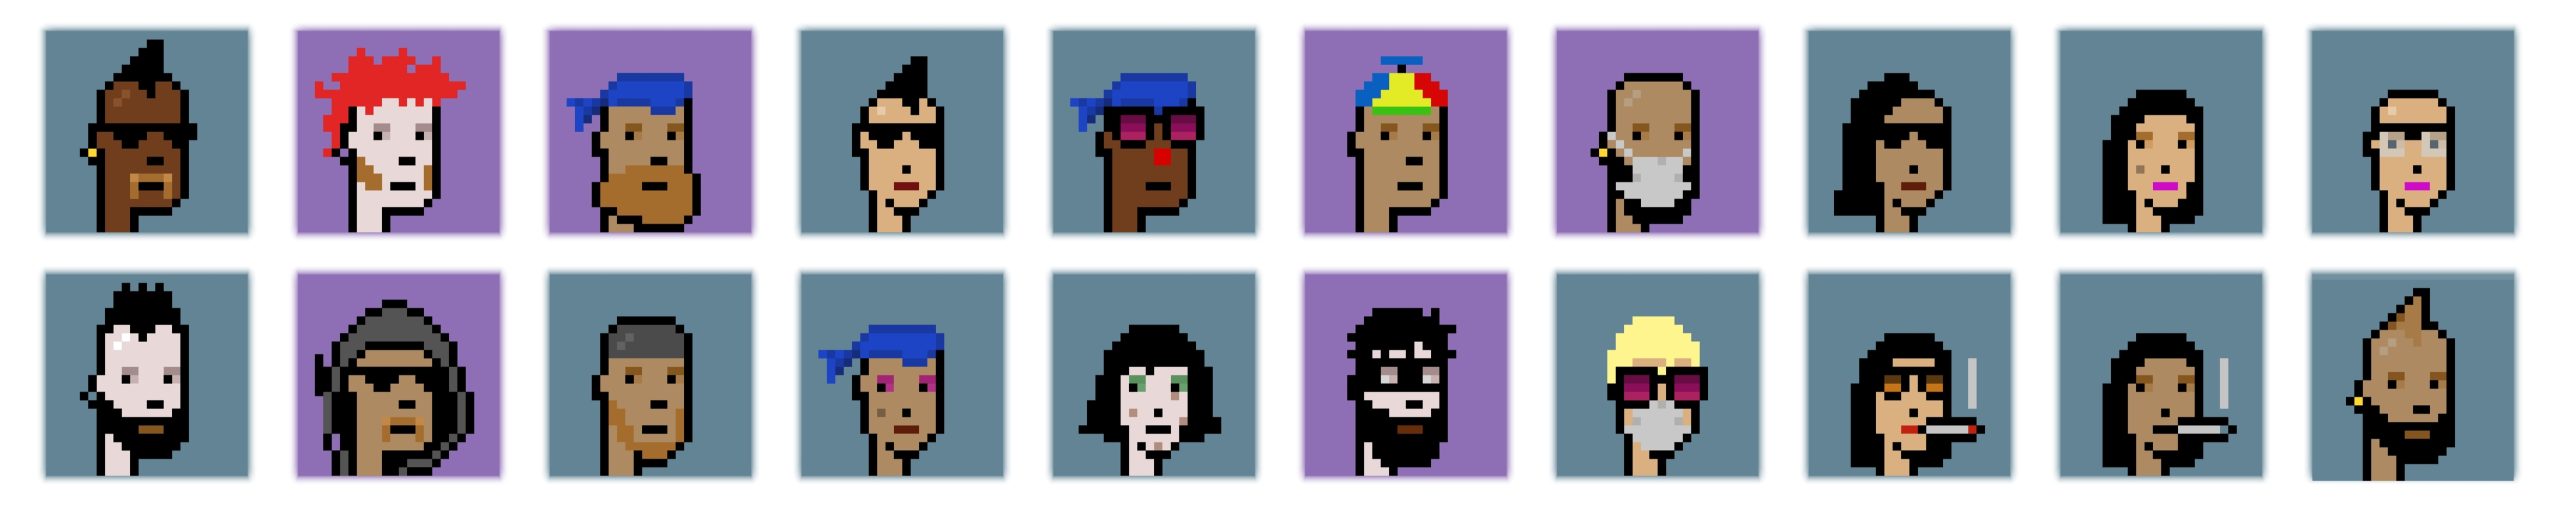 Yuga Labs Officially Releases IP Rights Associated with Cryptopunks and Meebits NFTs - Galaxy Digital Report Criticizes BAYC License